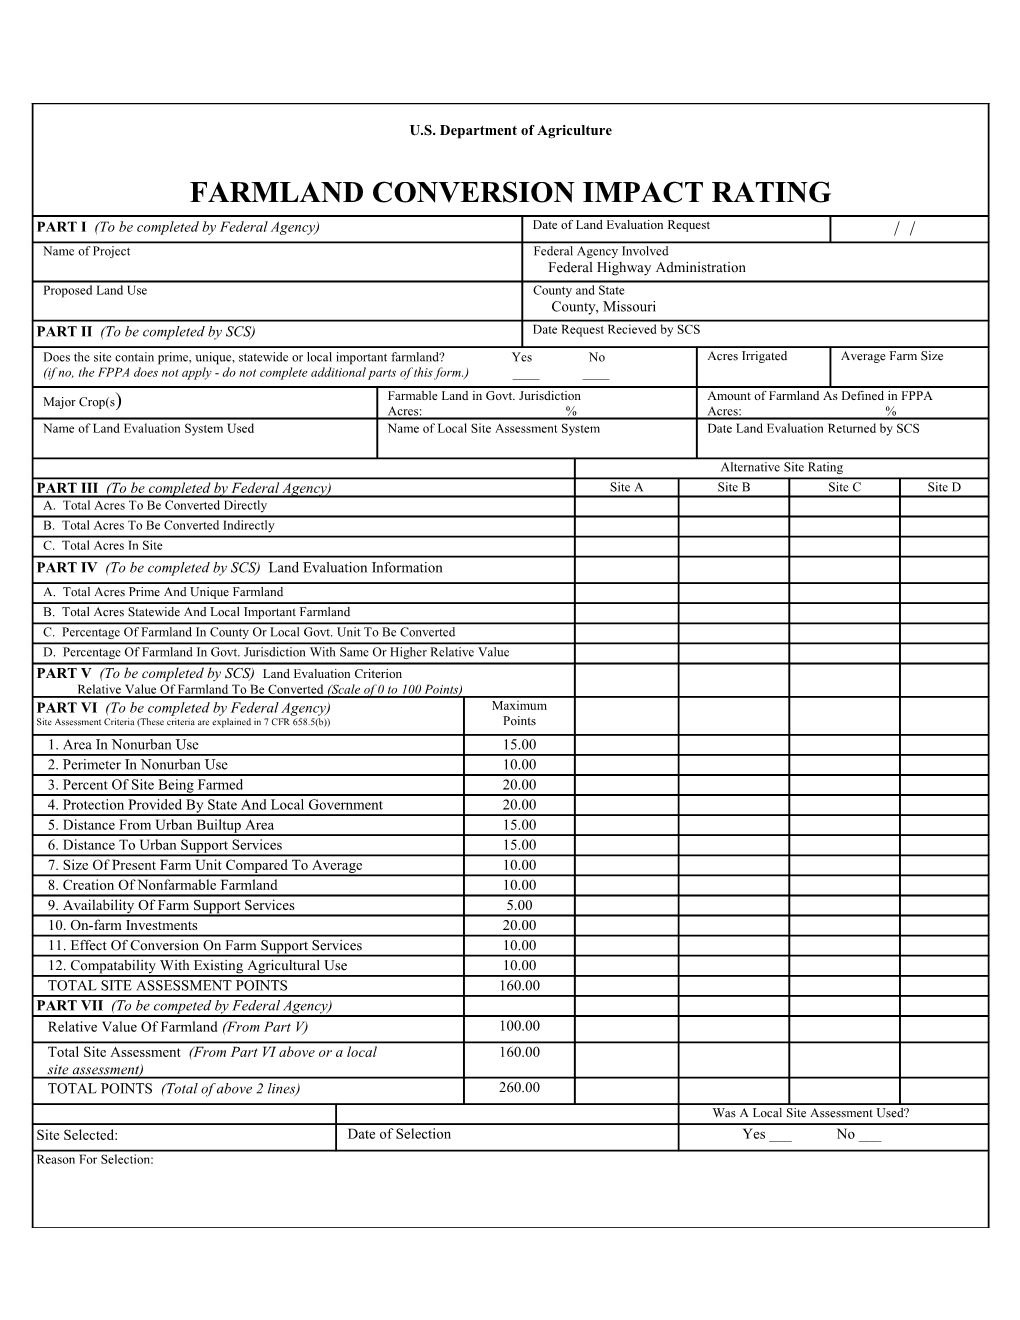 Steps in the Processing of the Farmland and Conversion Impact Rating Form